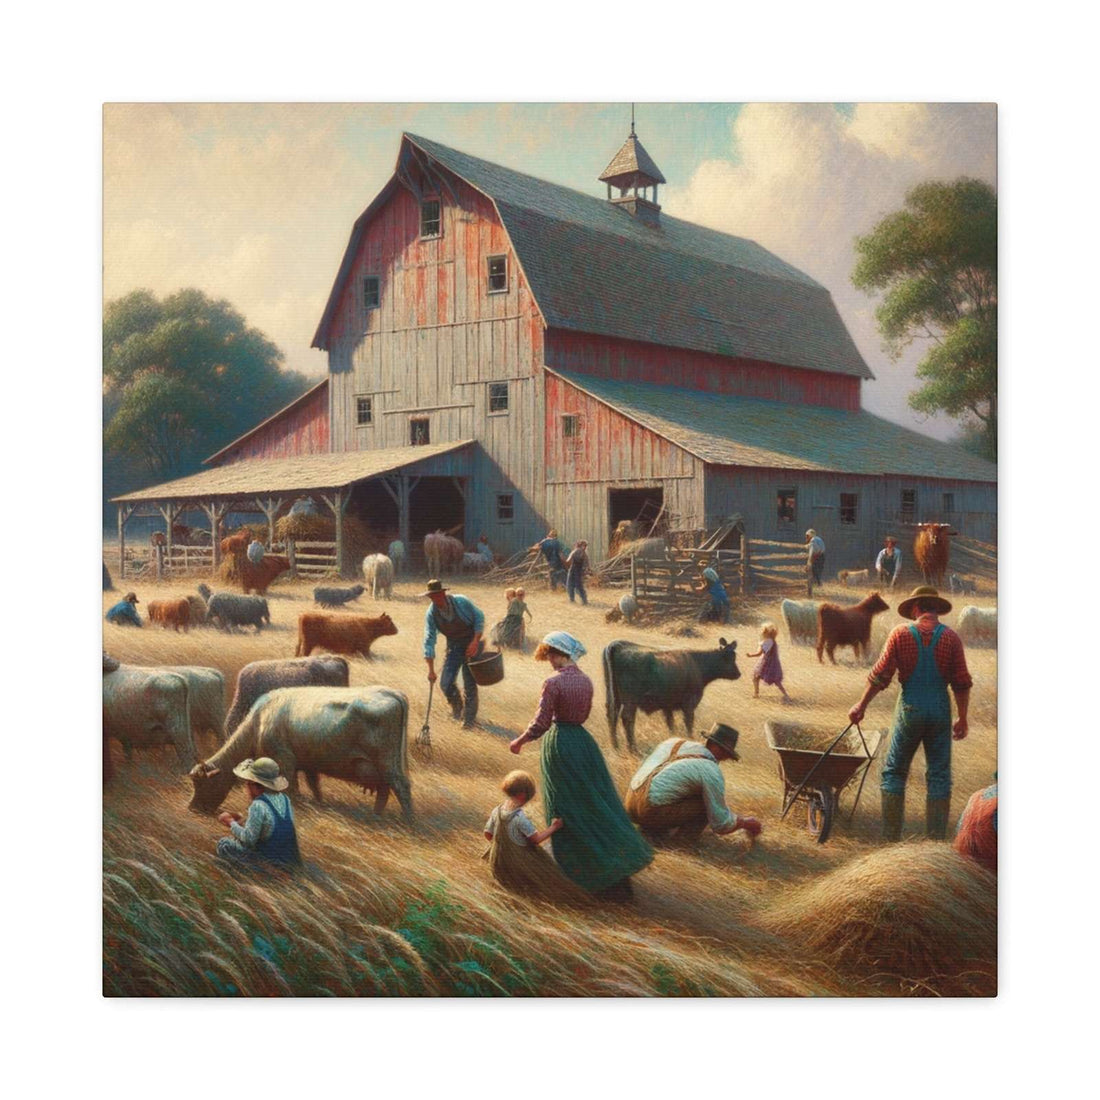 Fields of Hope Farms- Canvas